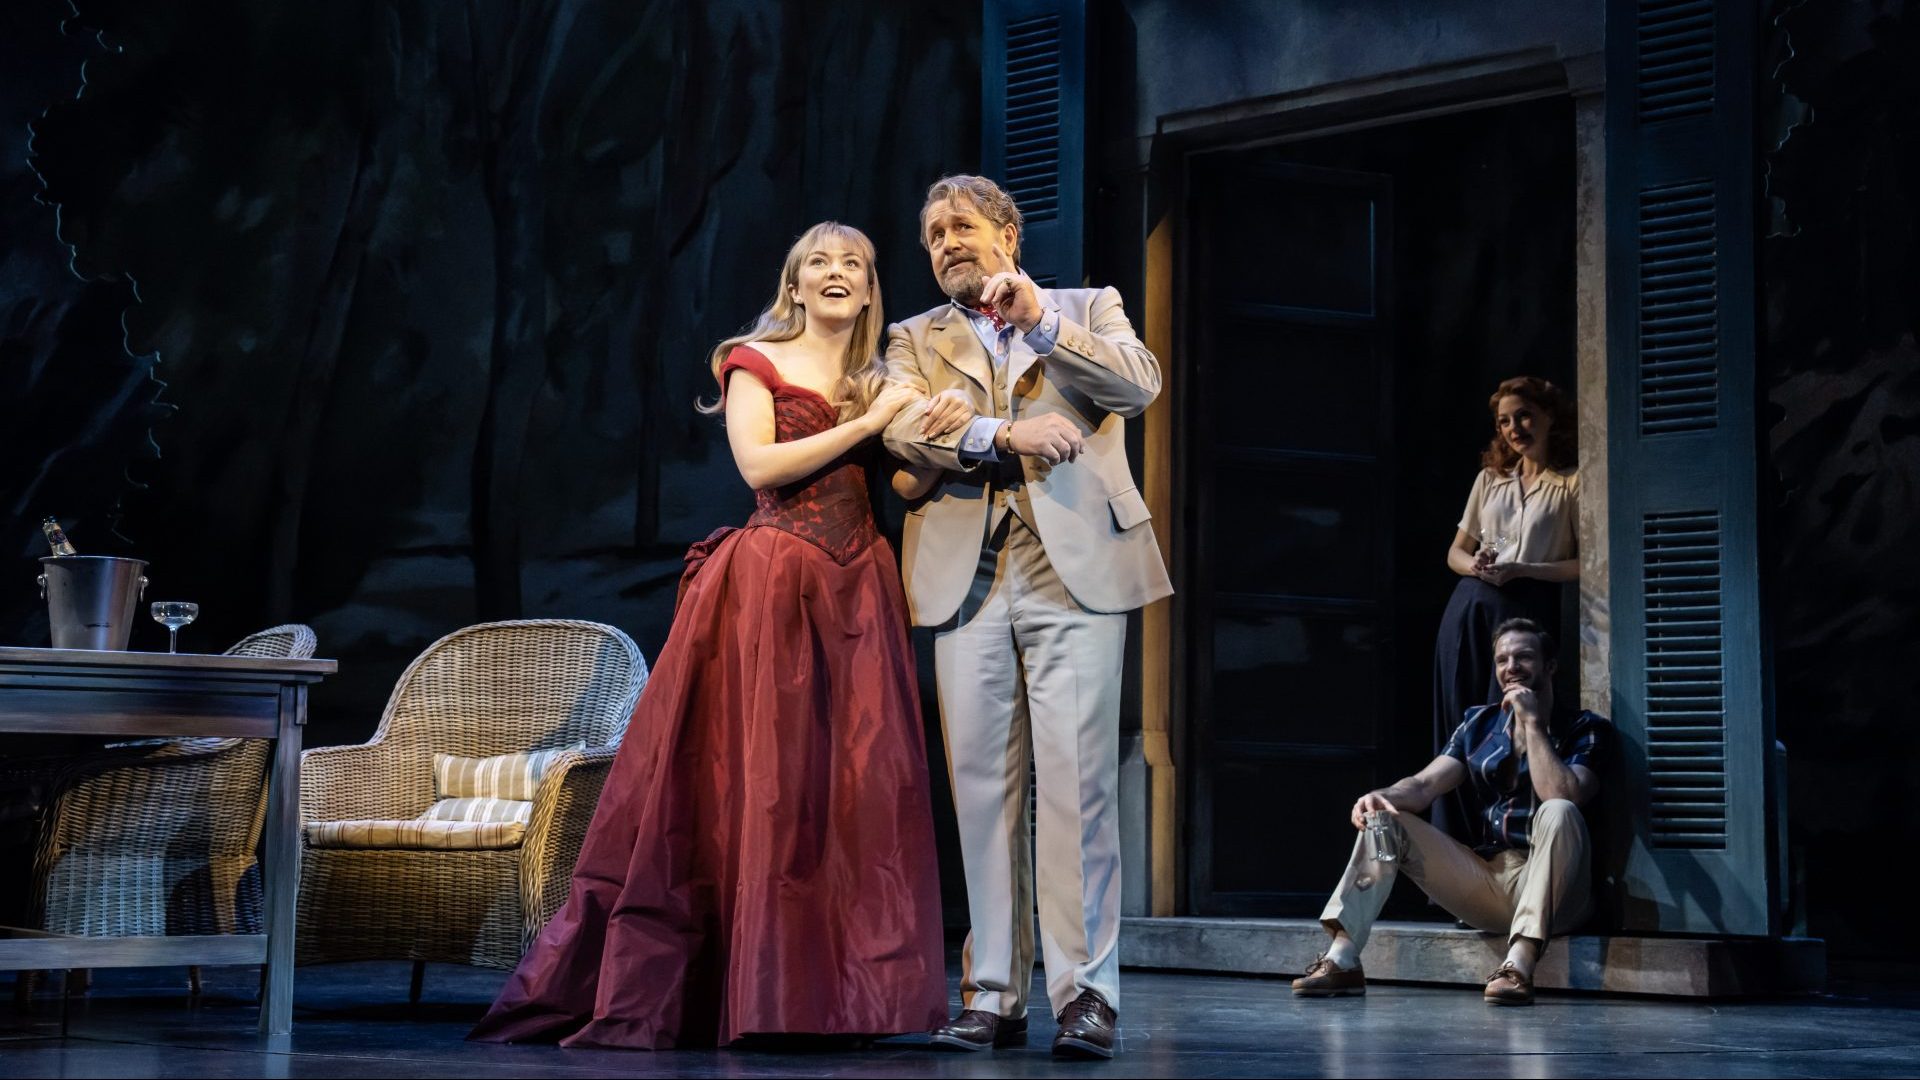 Anna Unwin (Jenny) and Michael Ball (George) in Aspects of Love. Photo: Johan Persson